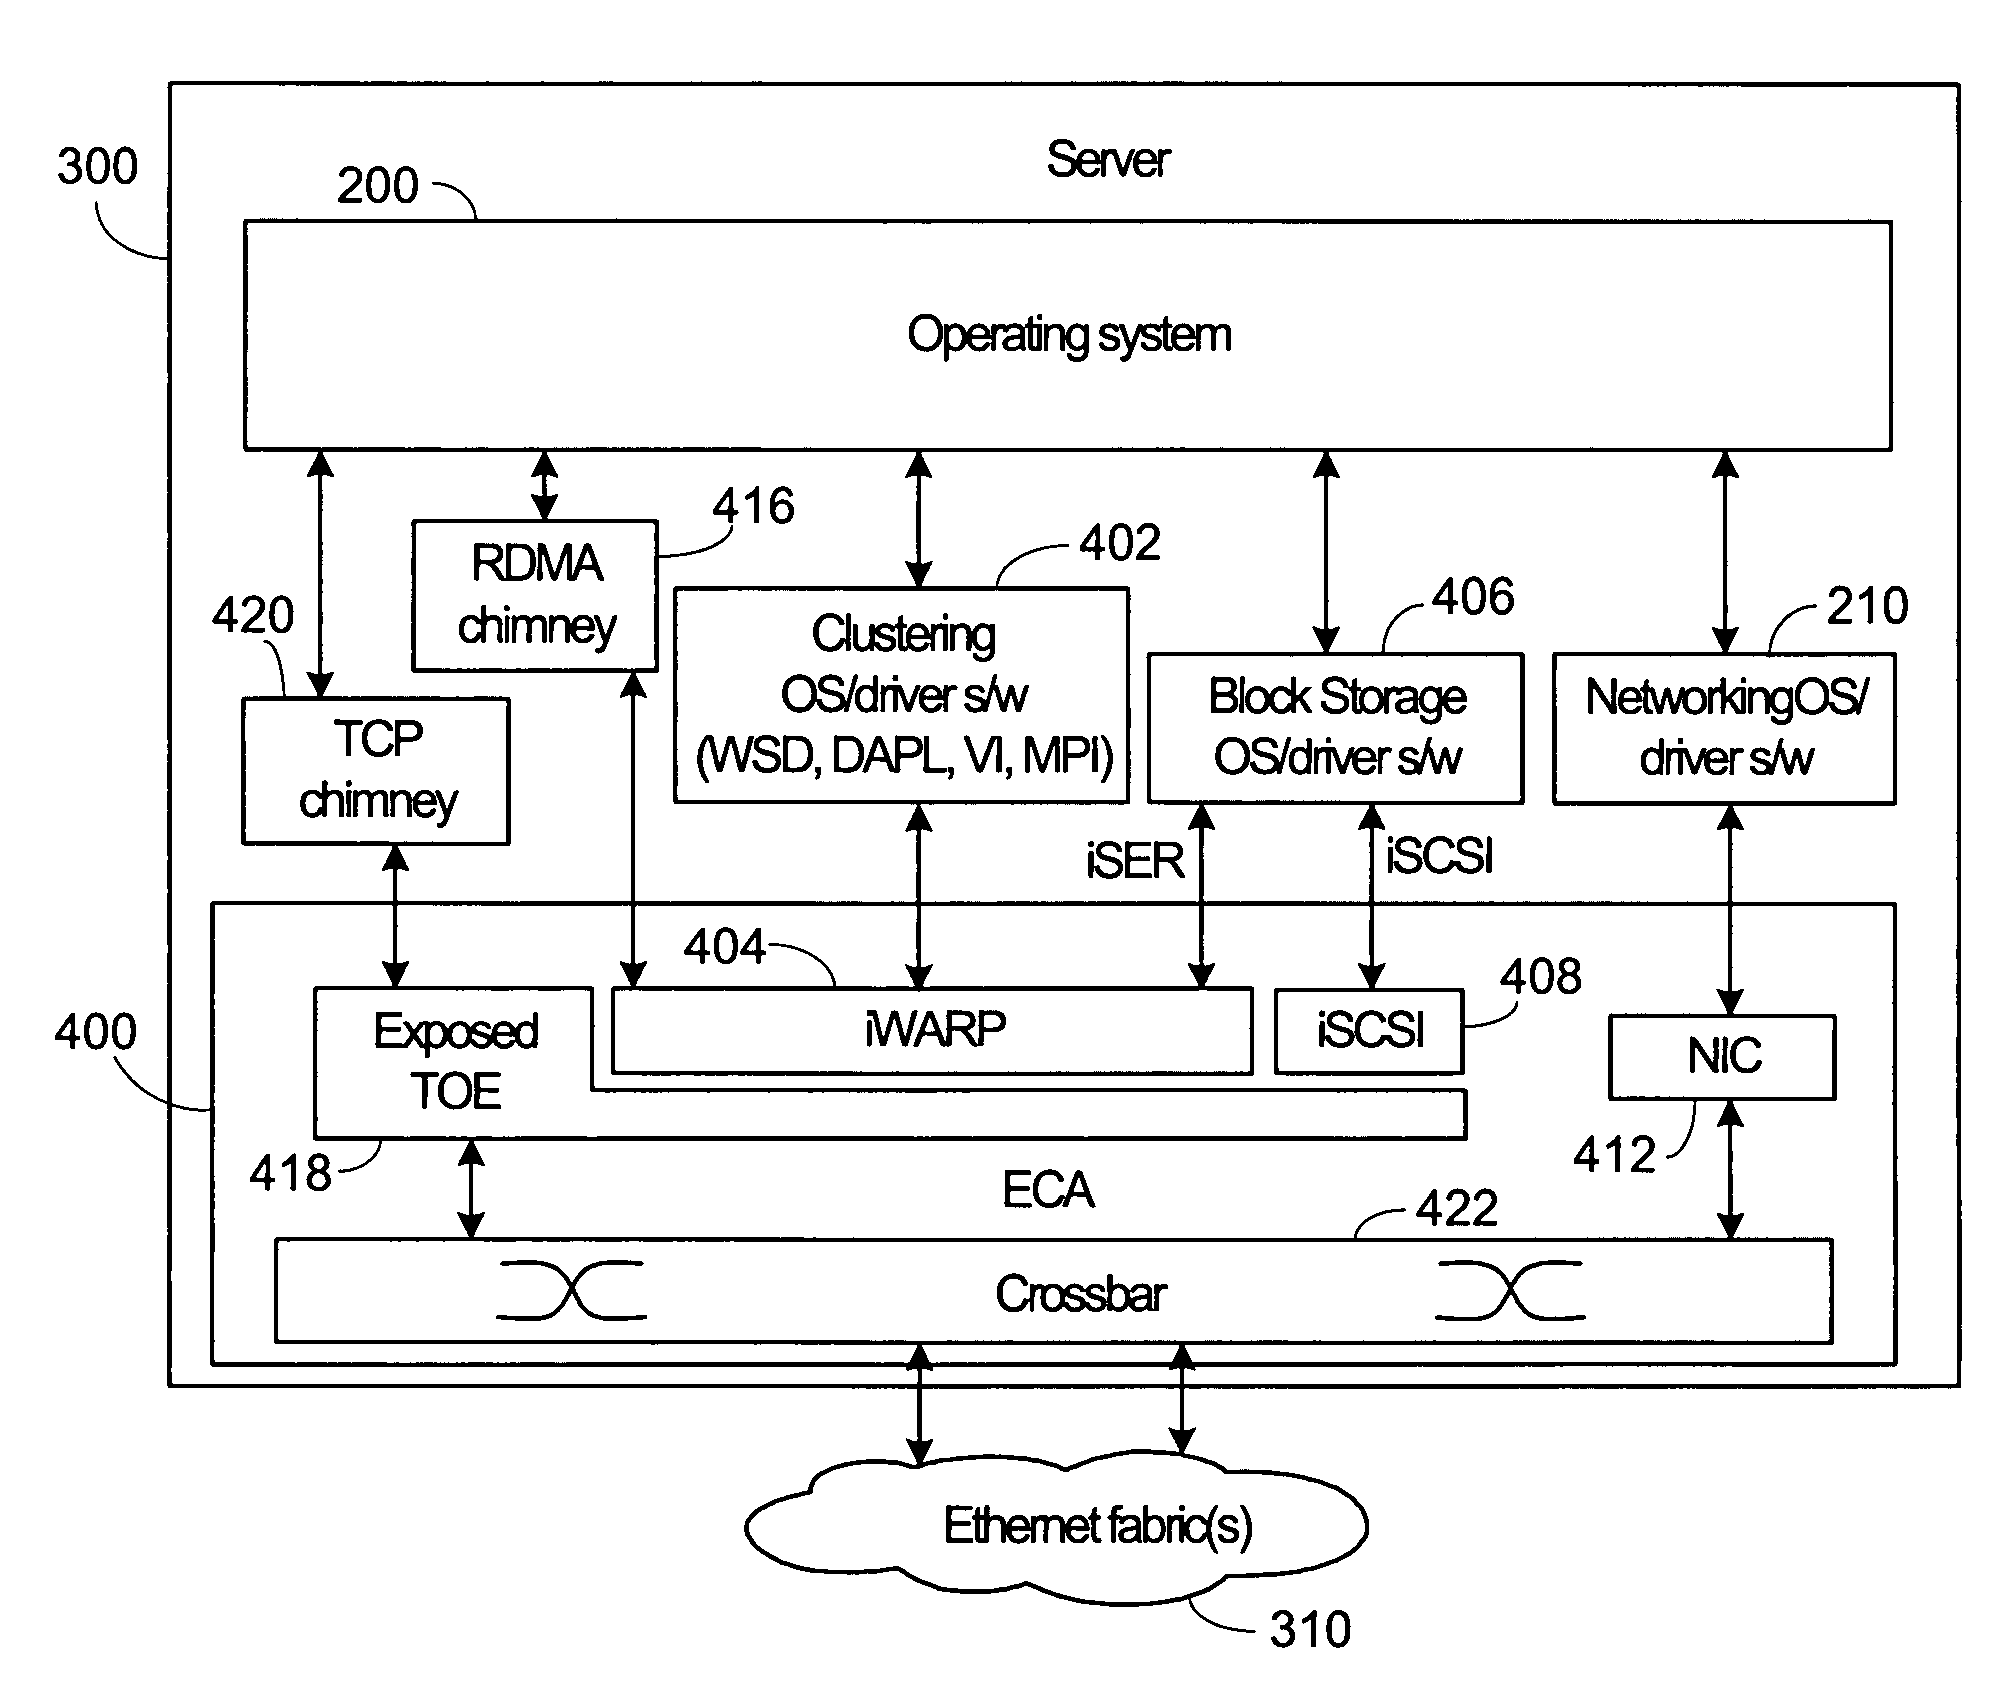 Method and apparatus for using a single multi-function adapter with different operating systems